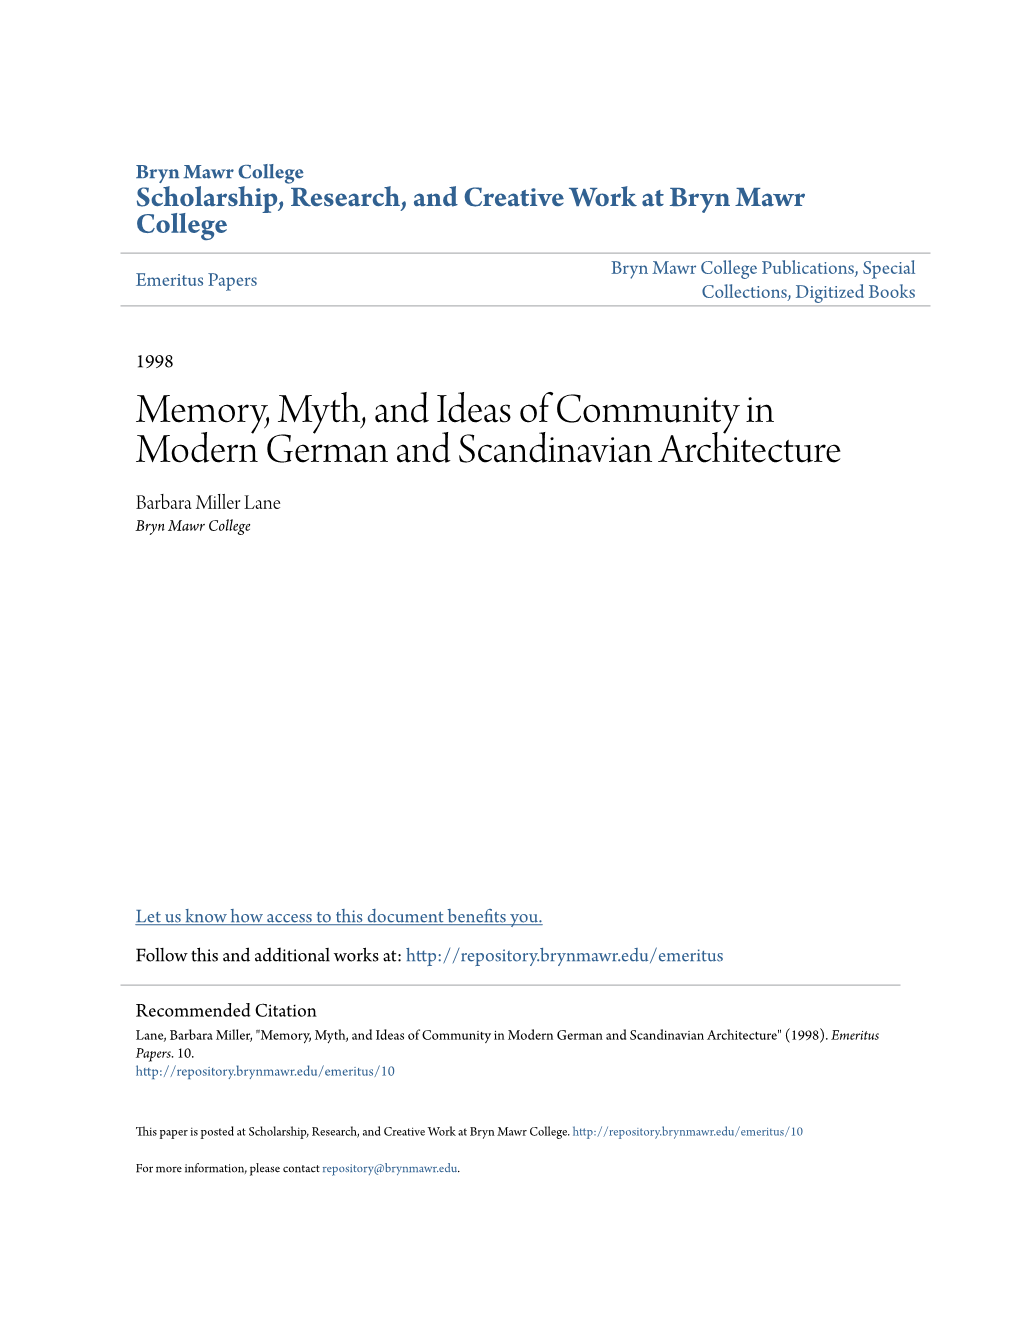 Memory, Myth, and Ideas of Community in Modern German and Scandinavian Architecture Barbara Miller Lane Bryn Mawr College